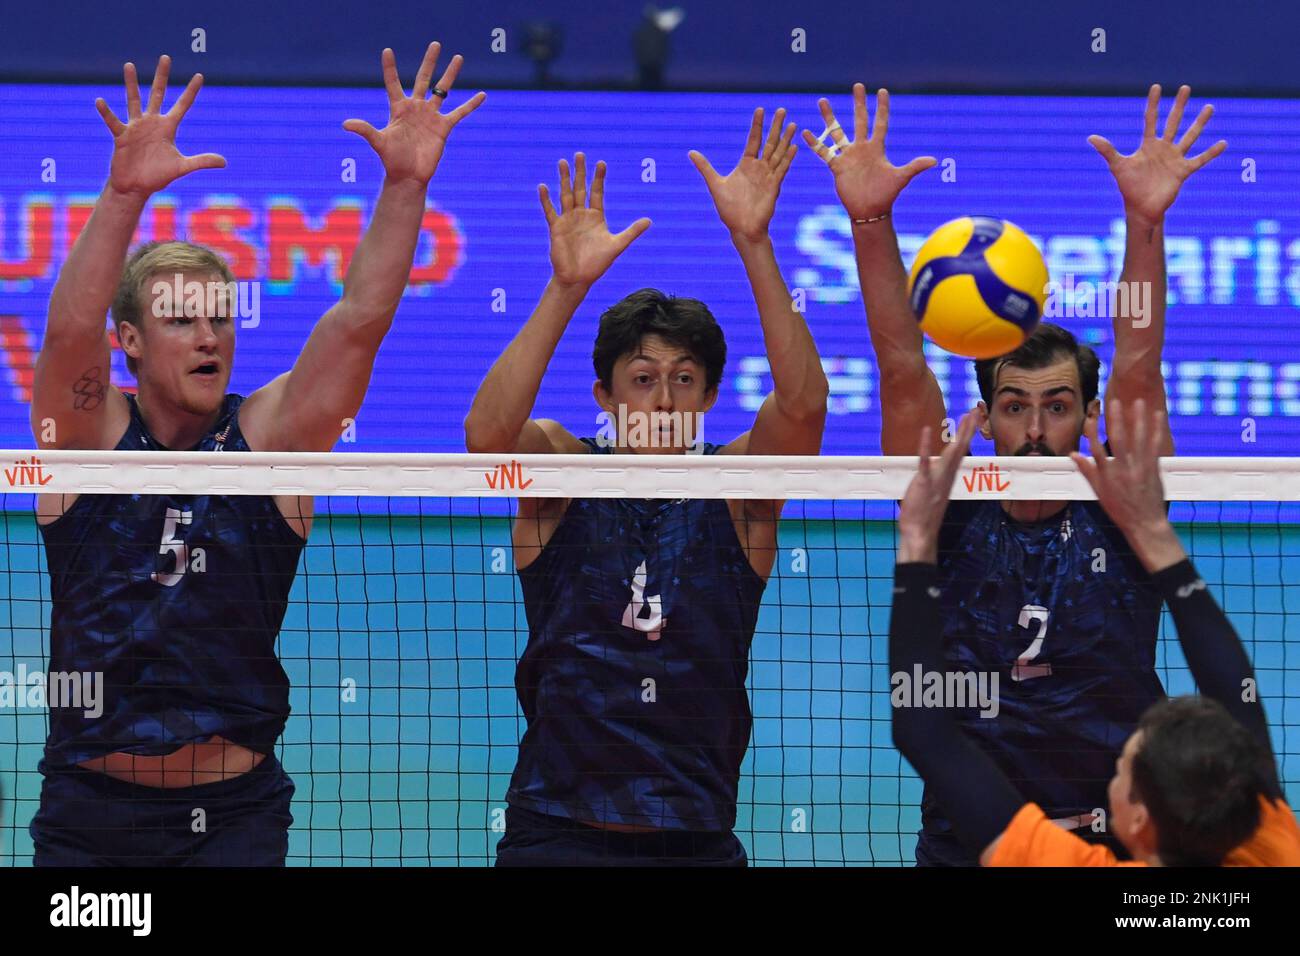 DF - Brasilia - 06/09/2022 - MENS VOLLEYBALL NATIONS LEAGUE NETHERLANDS X UNITED STATES